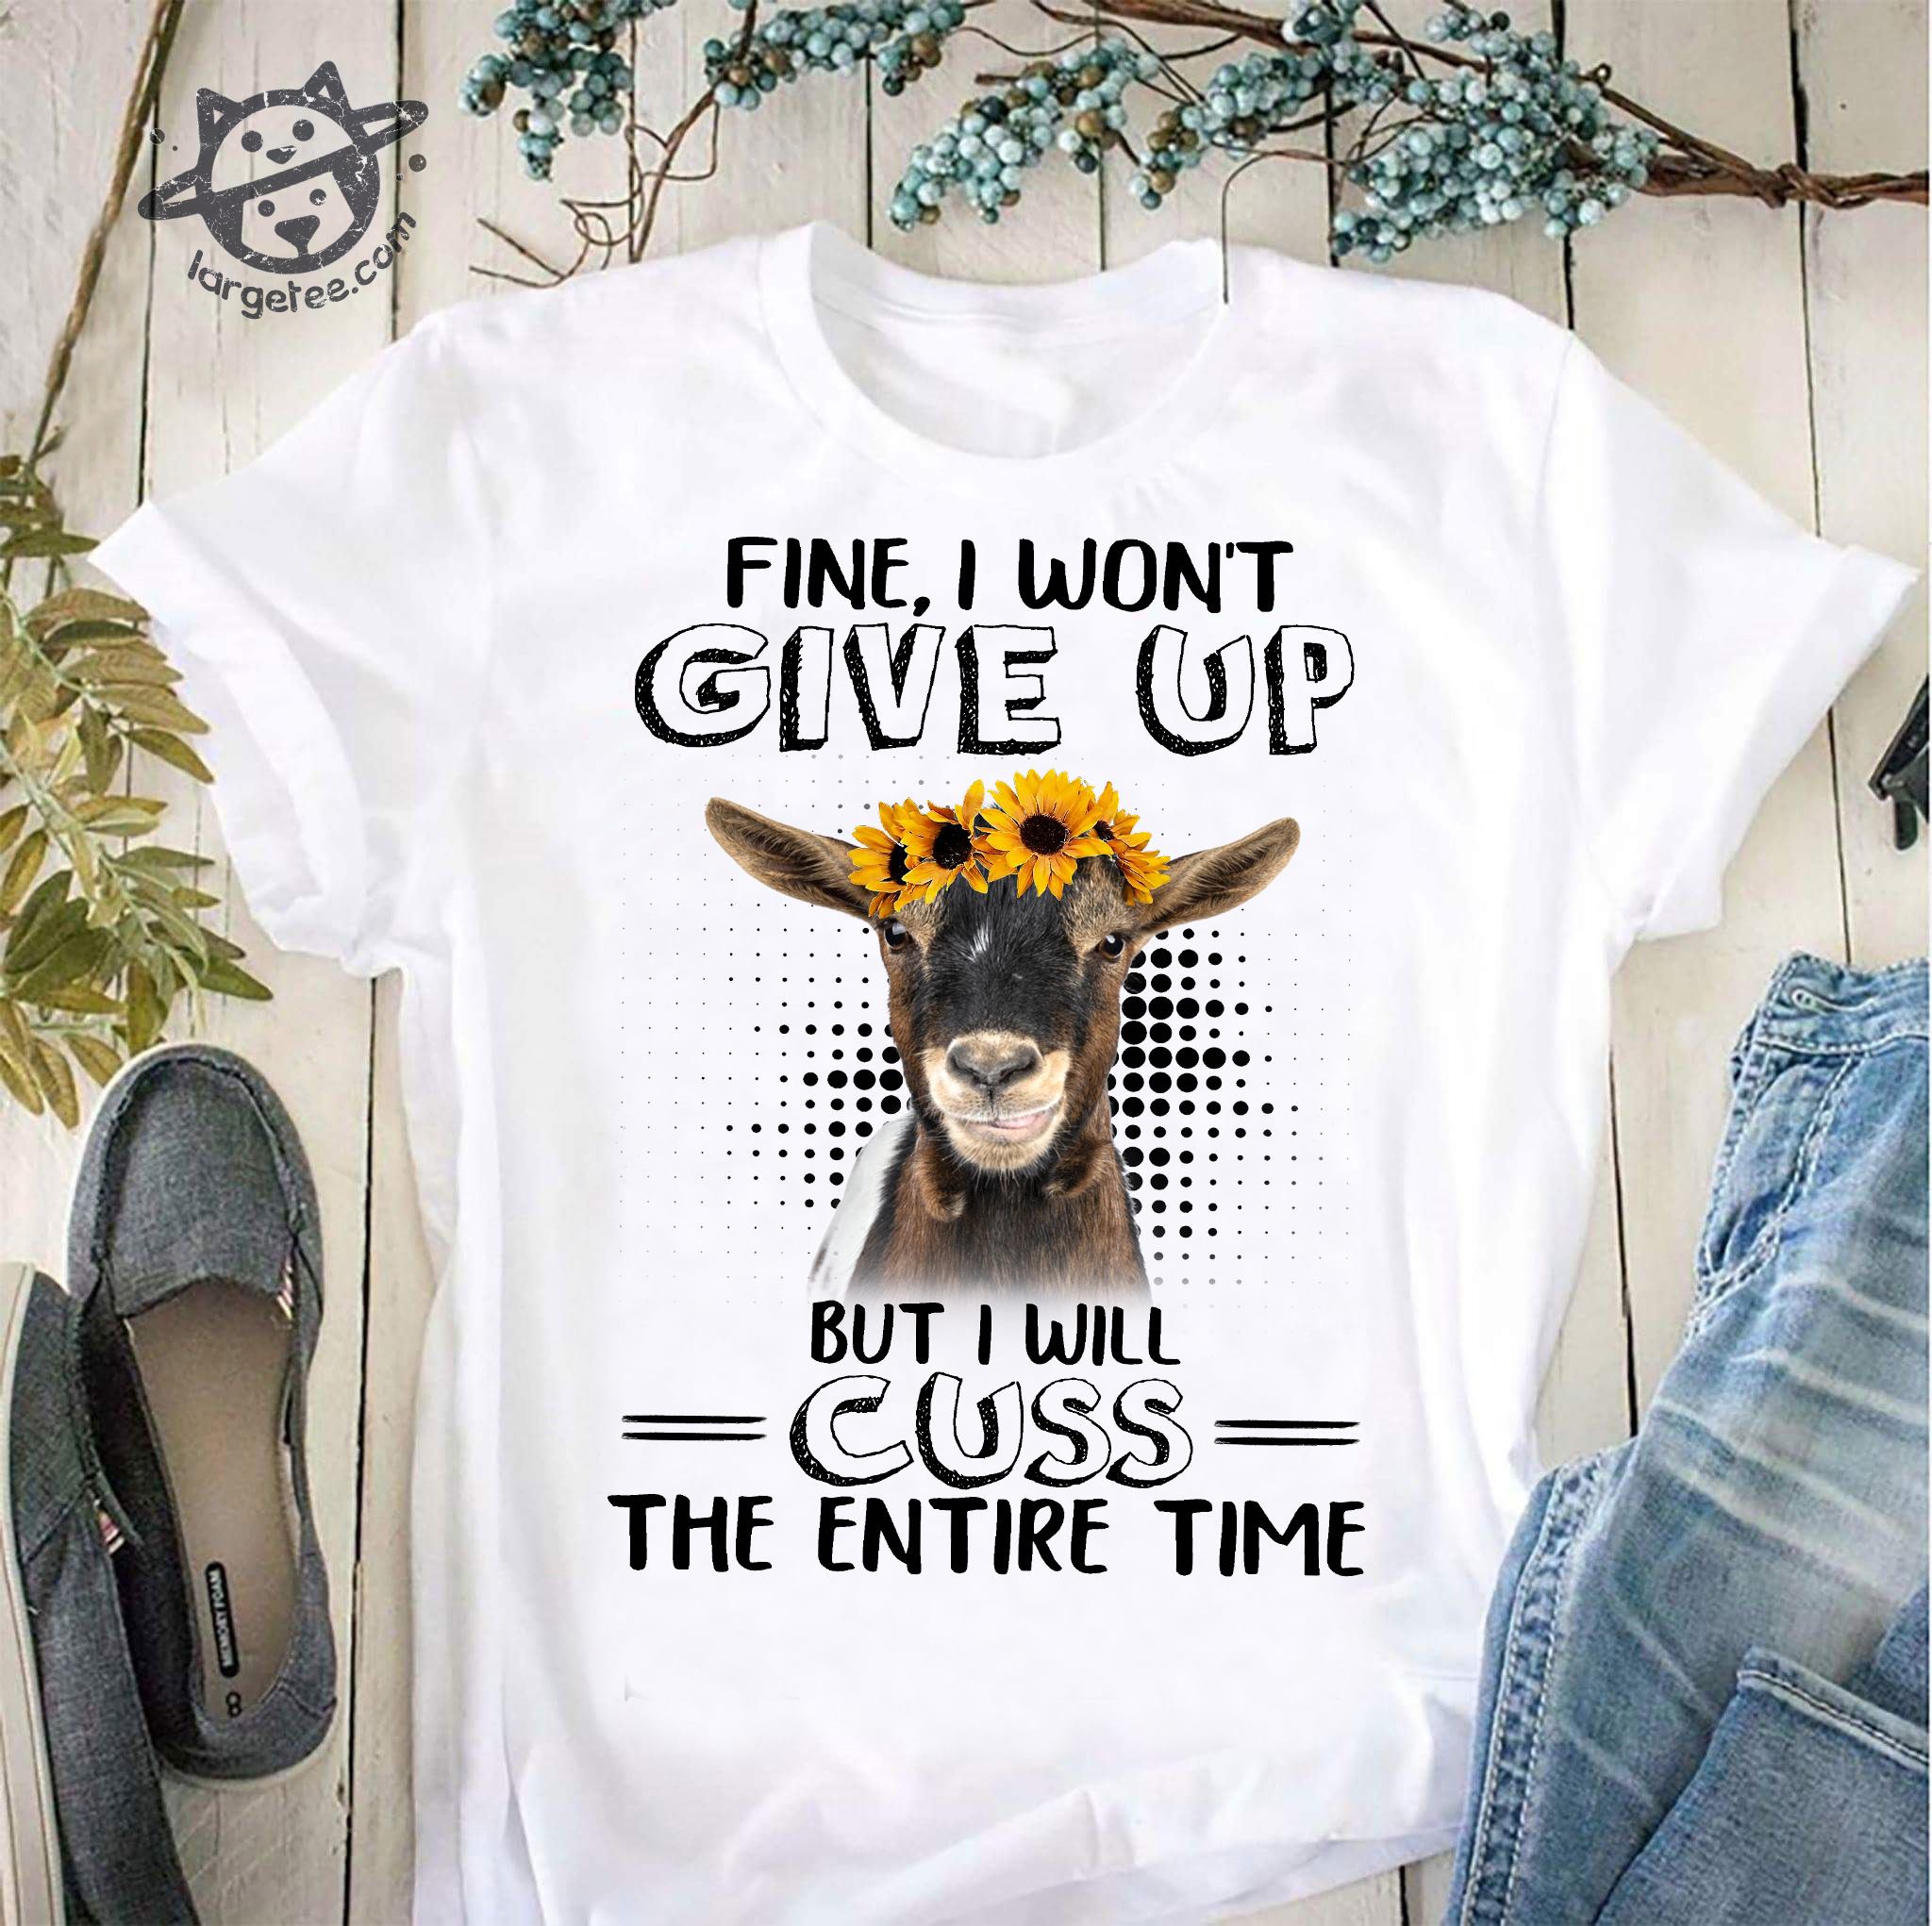 Fine, I won't give up but I will cuss the entire time - Grumpy goat